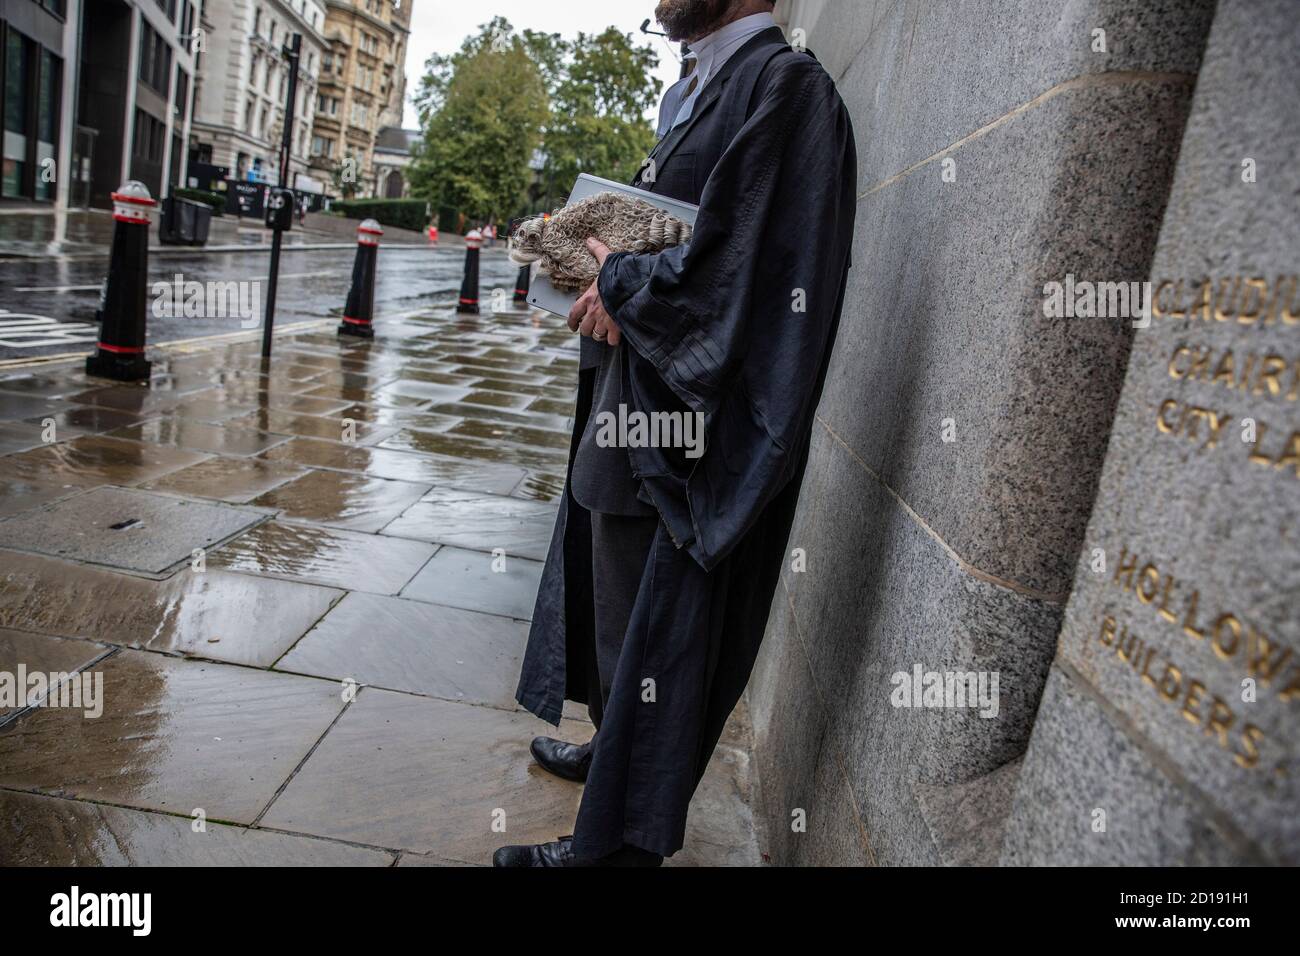 A Barrister takes a moment outside the entrance to the Old Bailey, Central Criminal Court, London, England, United Kingdom Stock Photo